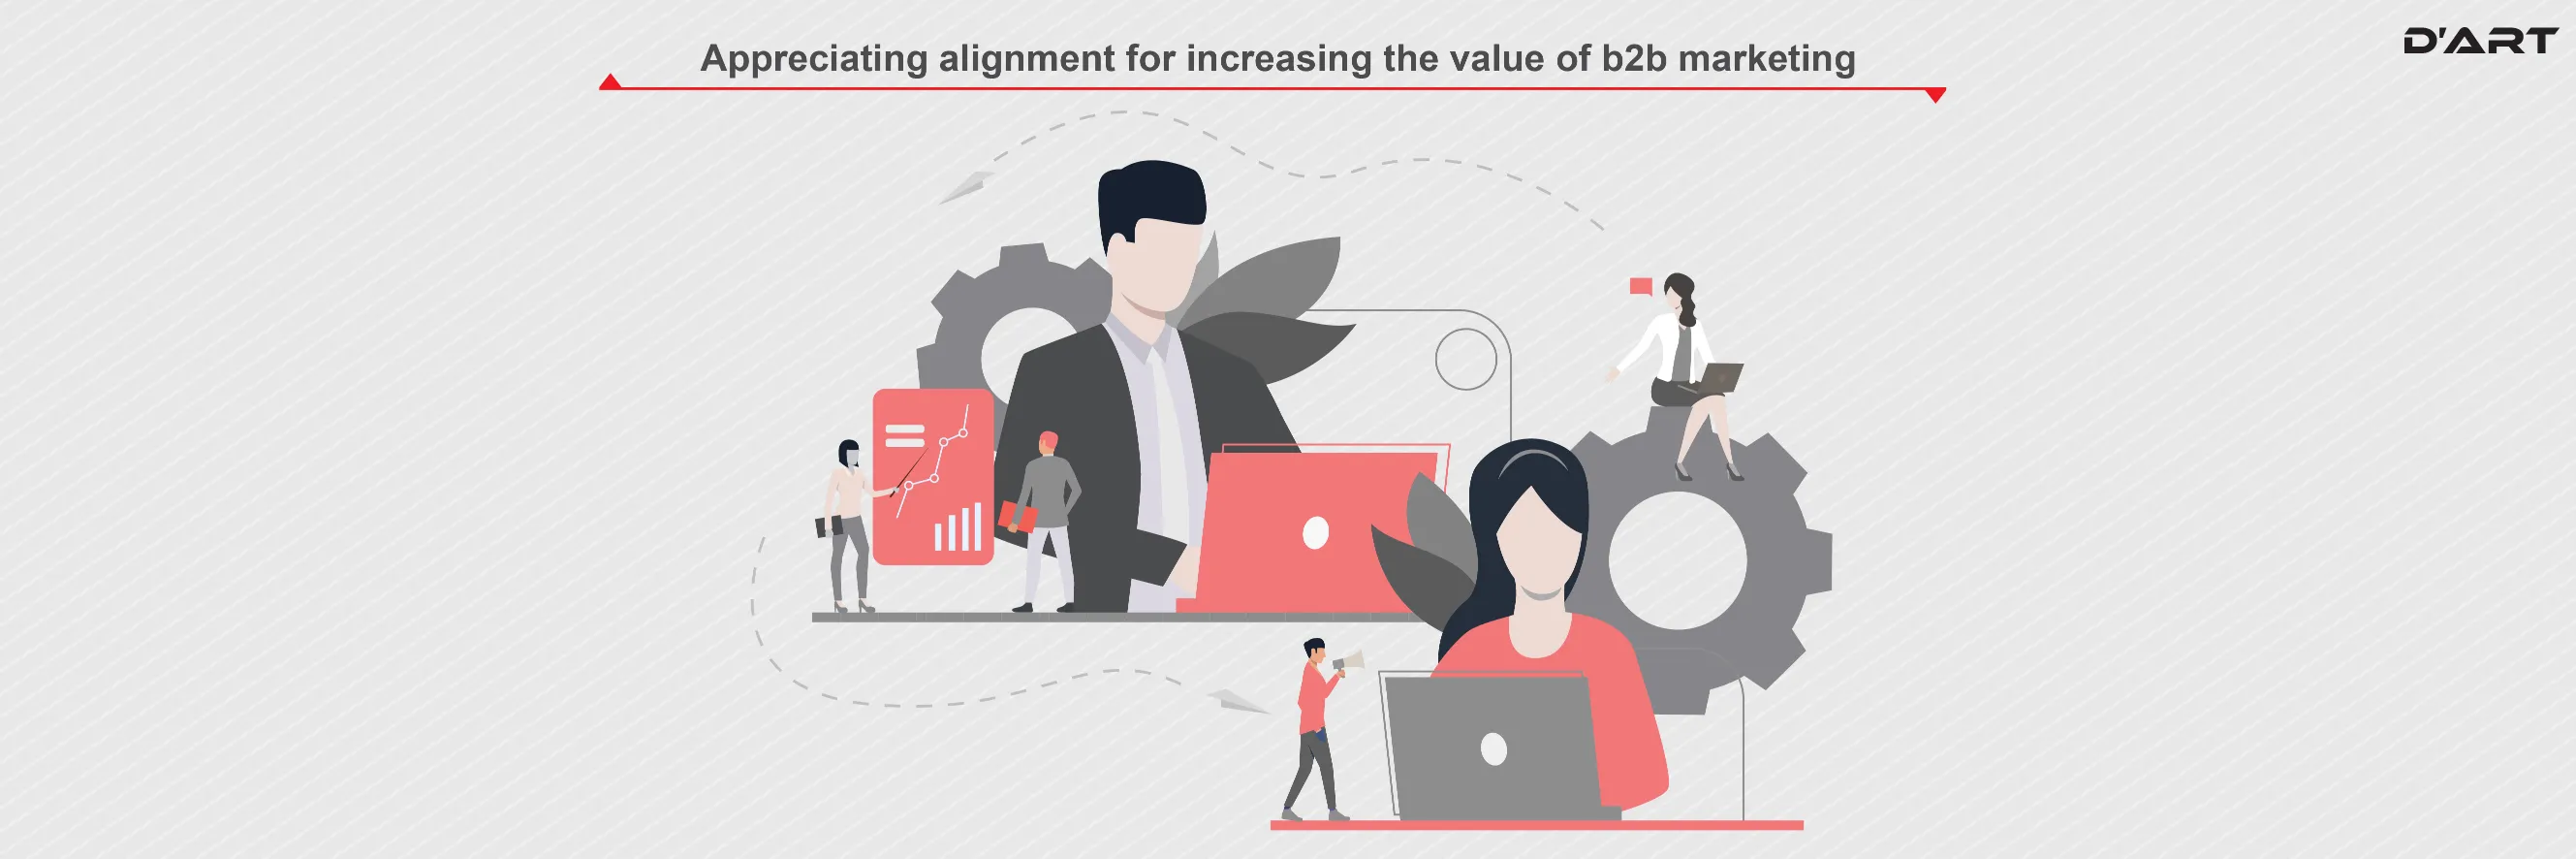 Appreciating alignment for increasing the value of b2b marketing